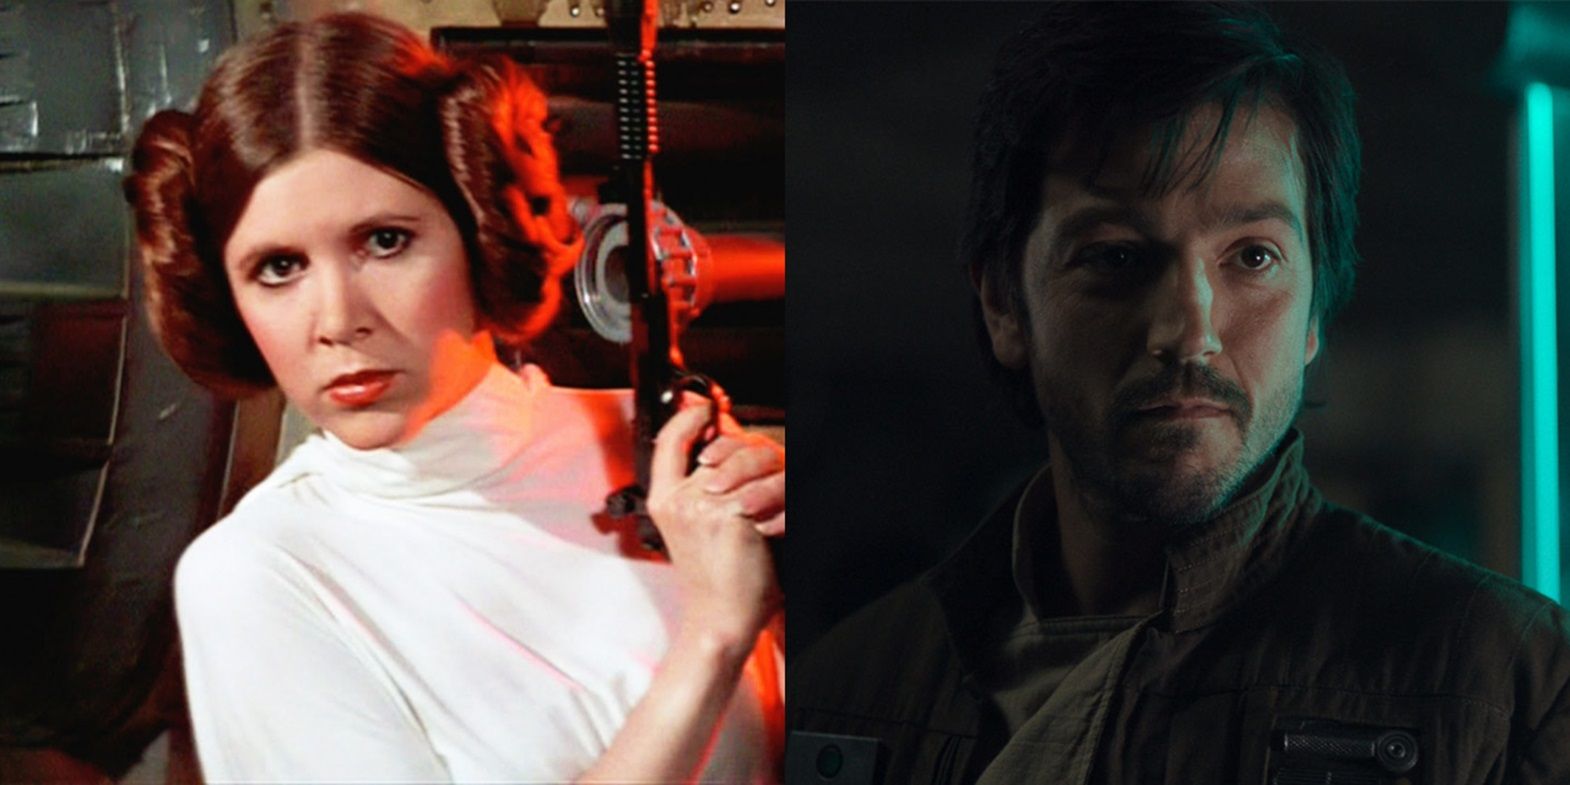 Split image of Leia in Star Wars and Cassian Andor in Rogue One